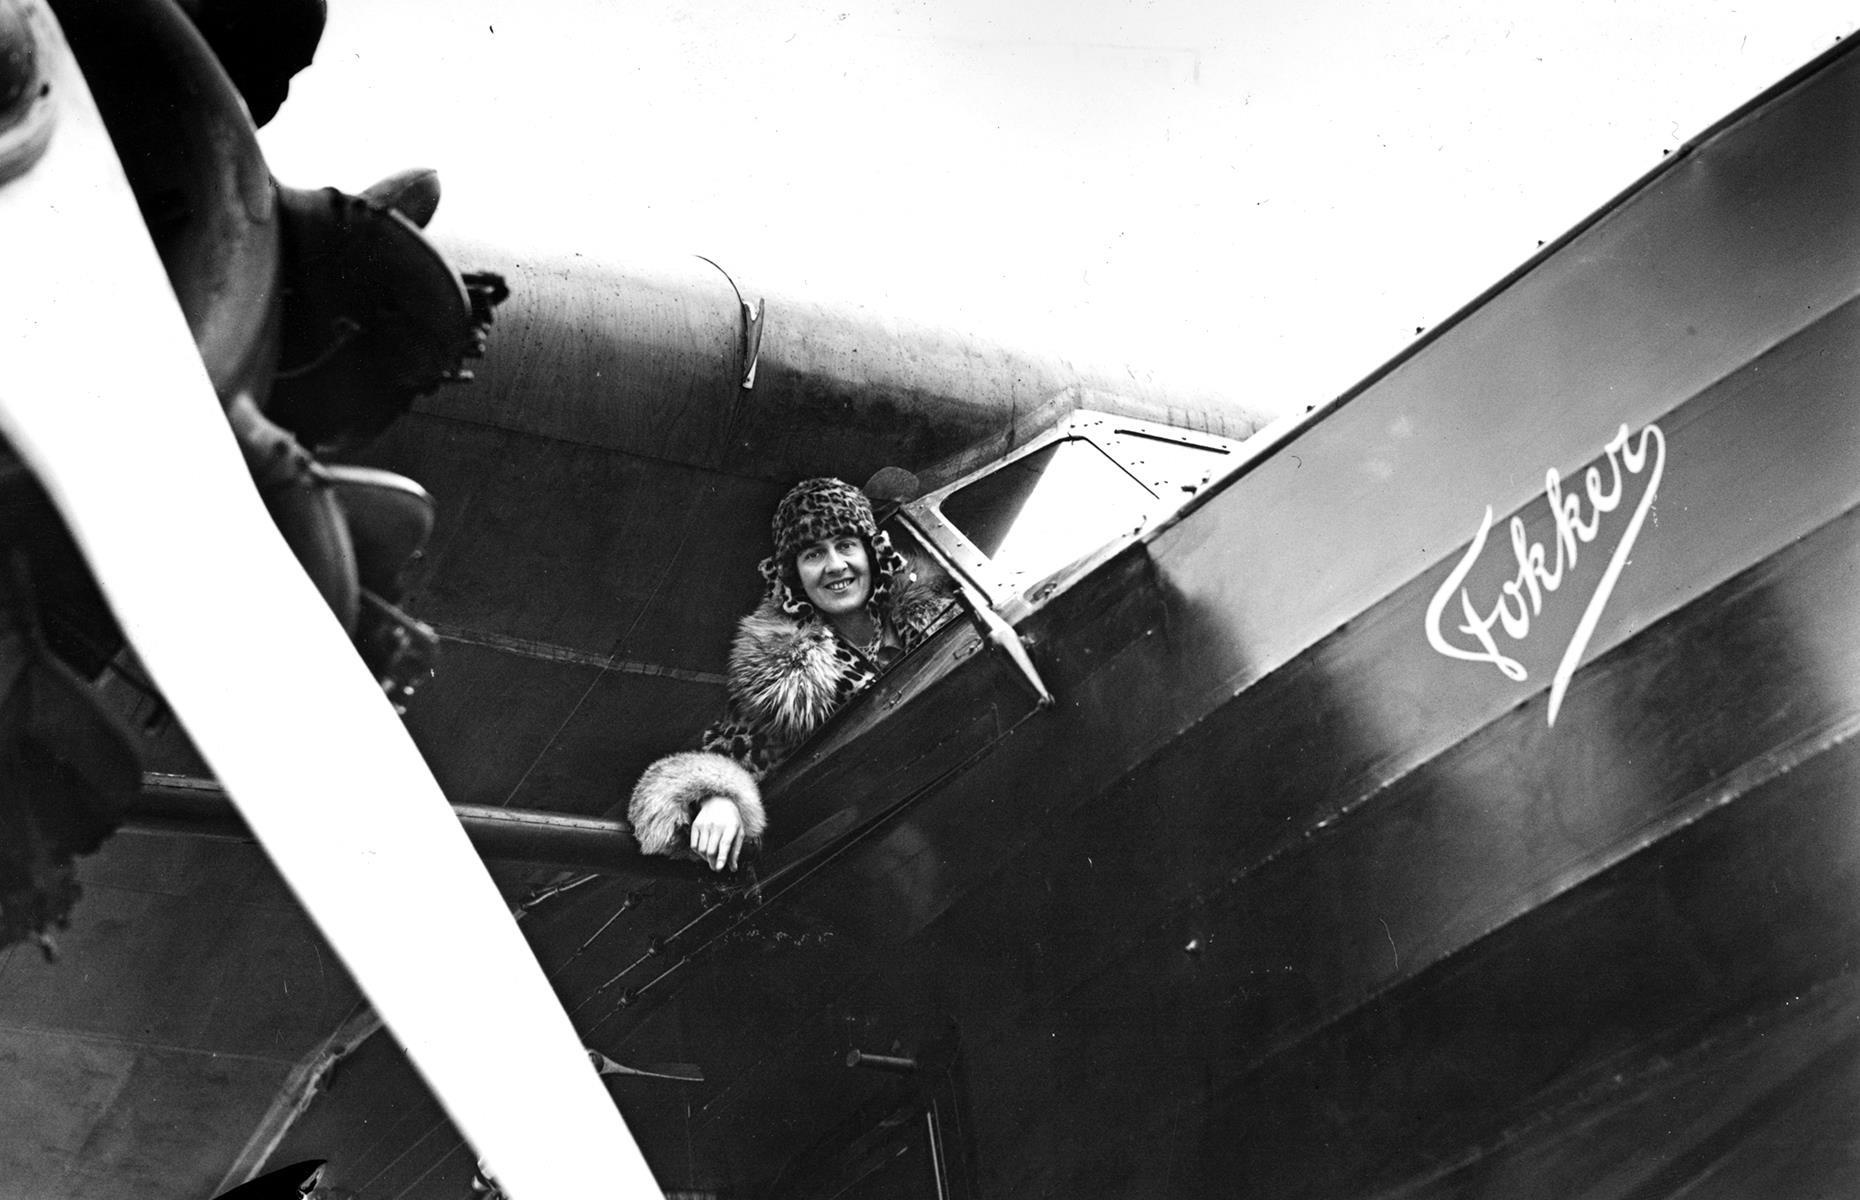 Other notable early commercial airlines included the now defunct Pan American Airways and KLM Royal Dutch Airlines, which is still in operation. KLM reached destinations all over Europe, including Copenhagen, London and Paris. This photo shows Lady Heath, Britain's first female passenger-line pilot, in a KLM-owned Fokker aircraft.